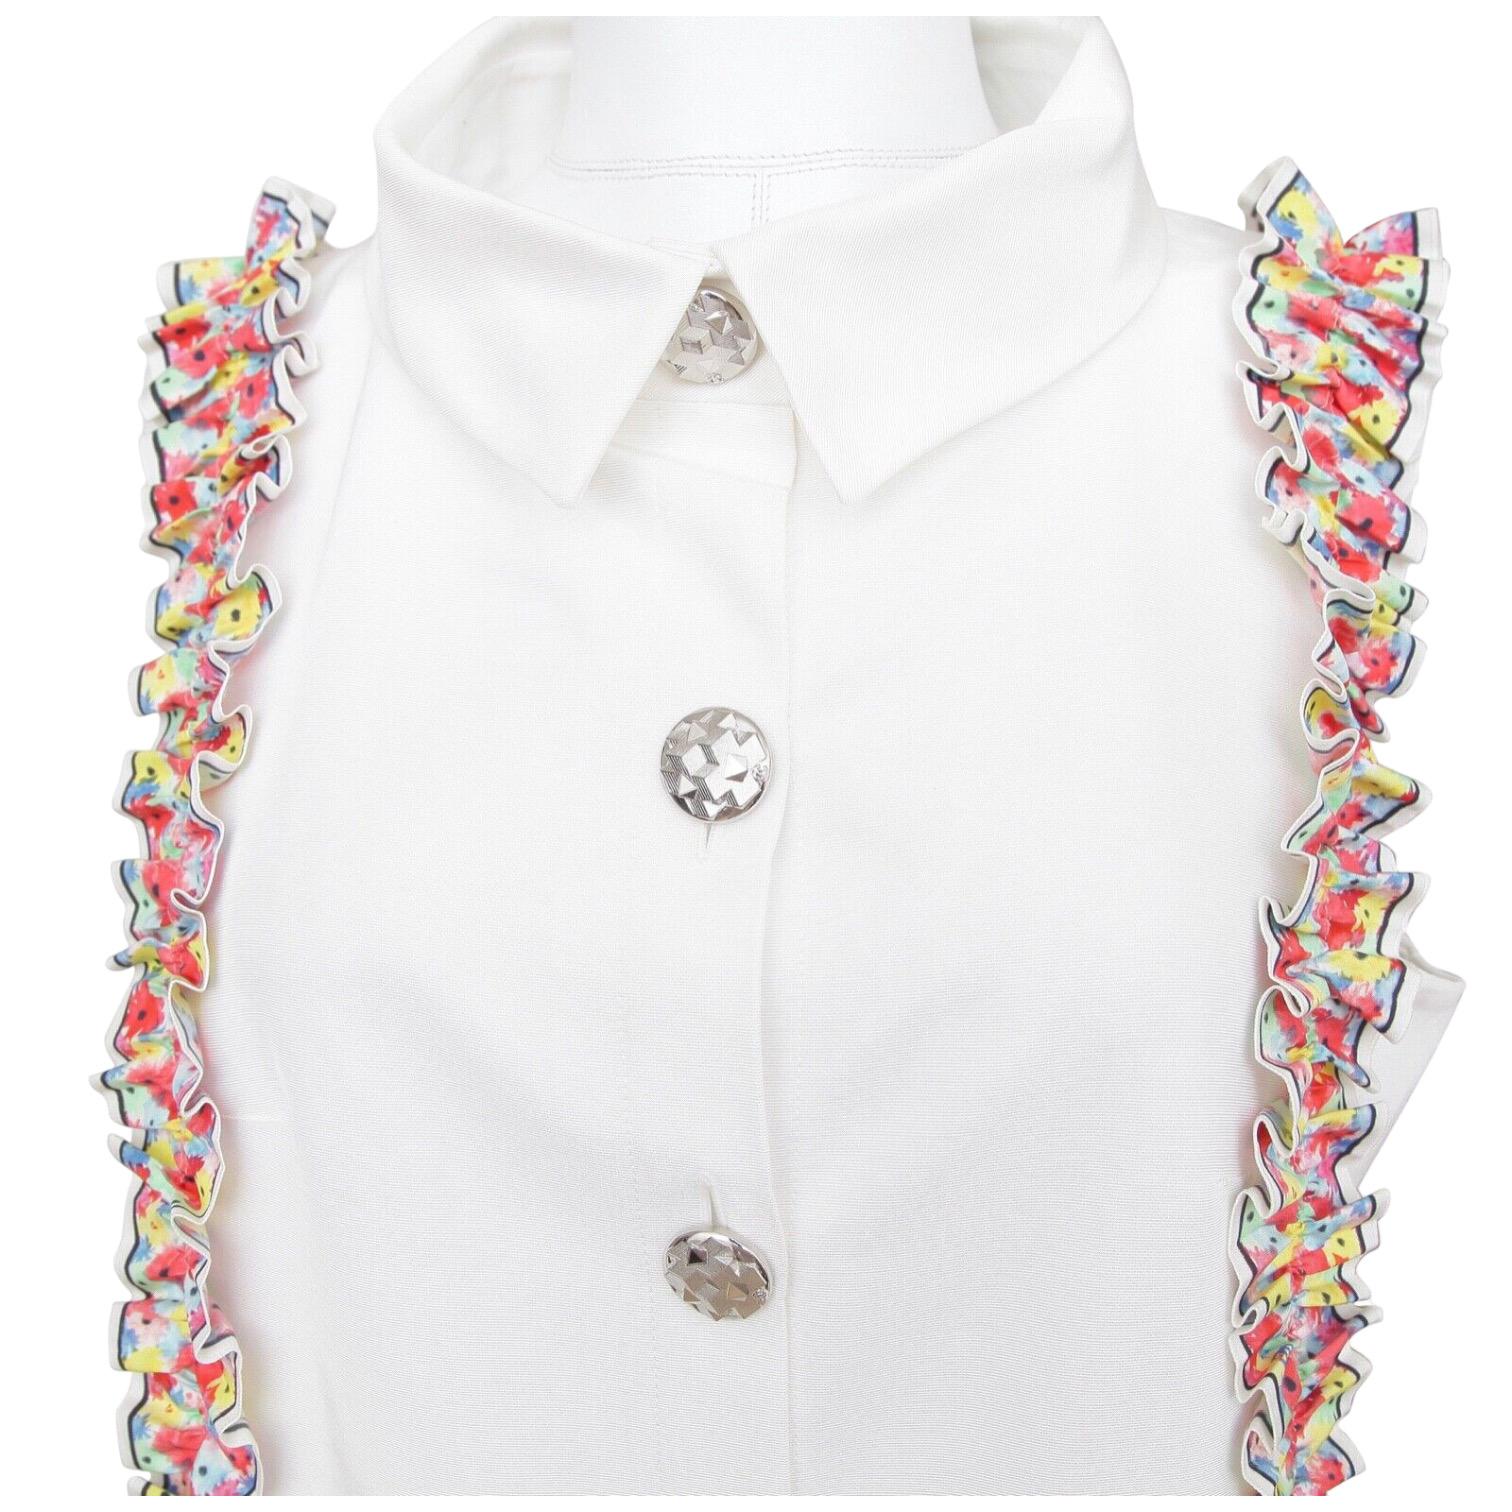 CHANEL Dress White Sleeveless Multicolor Floral Silver HW Collar 42 RUNWAY 2016 1